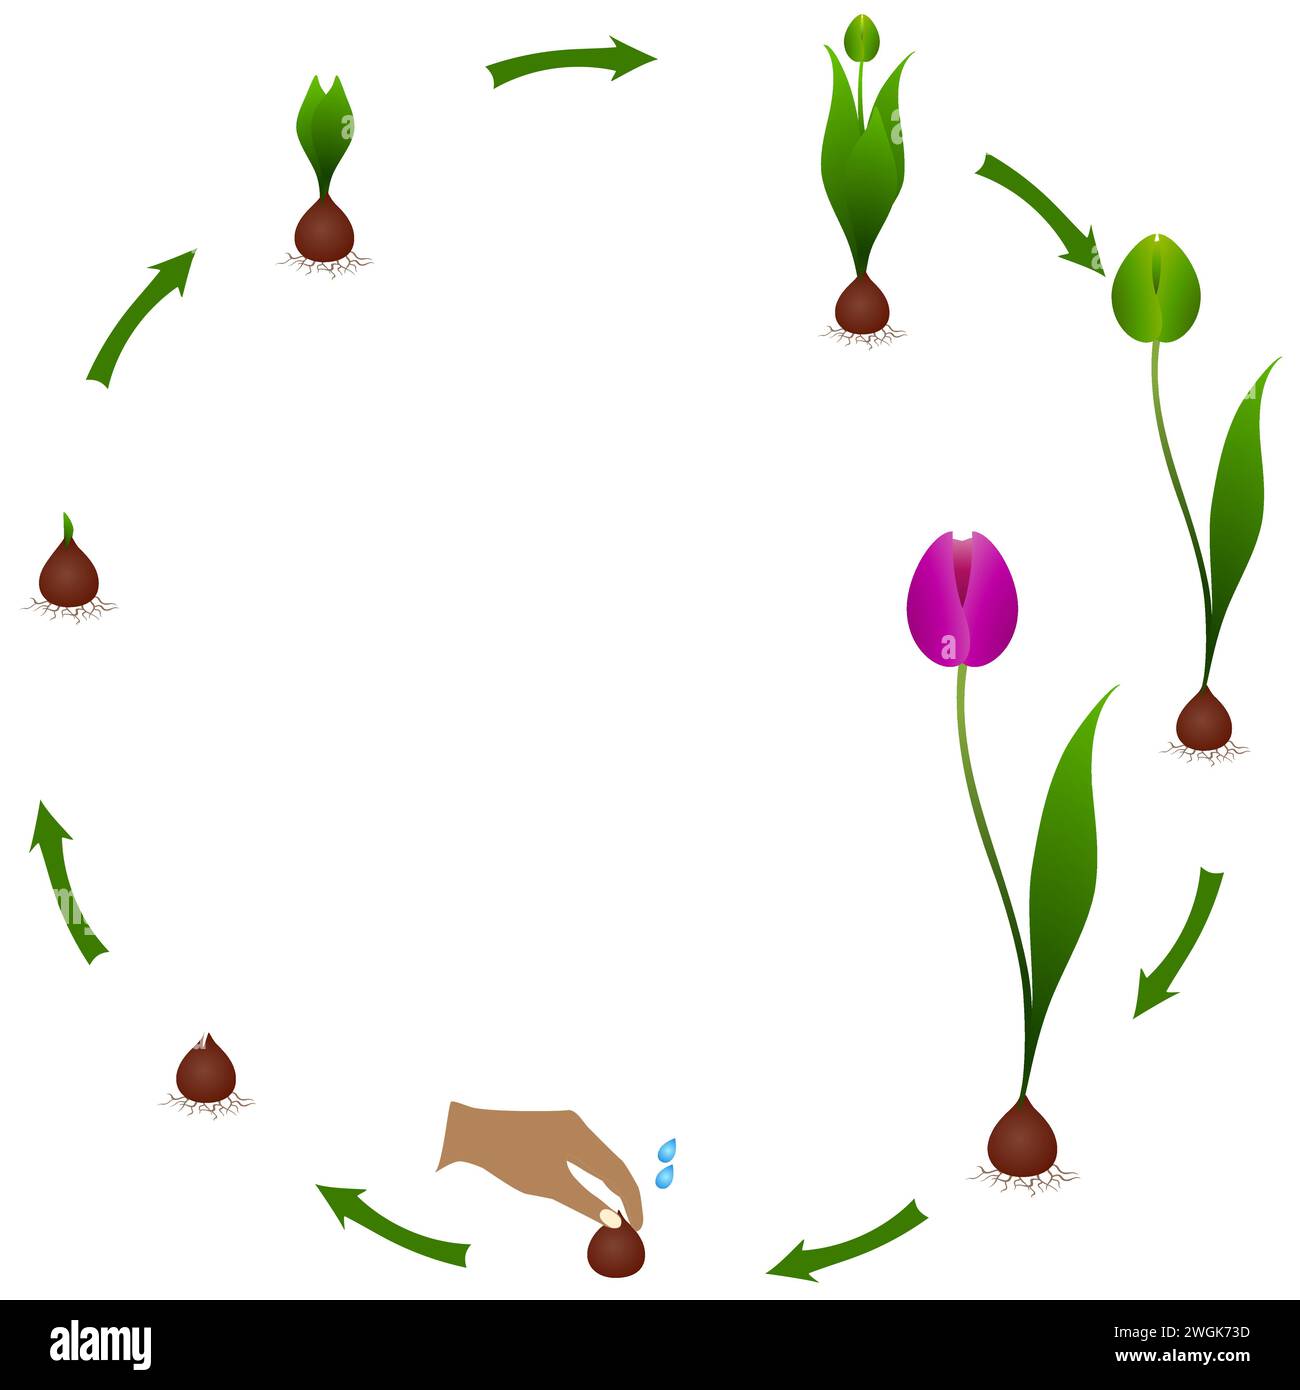 Life cycle of a tulip plant on a white background. Stock Vector